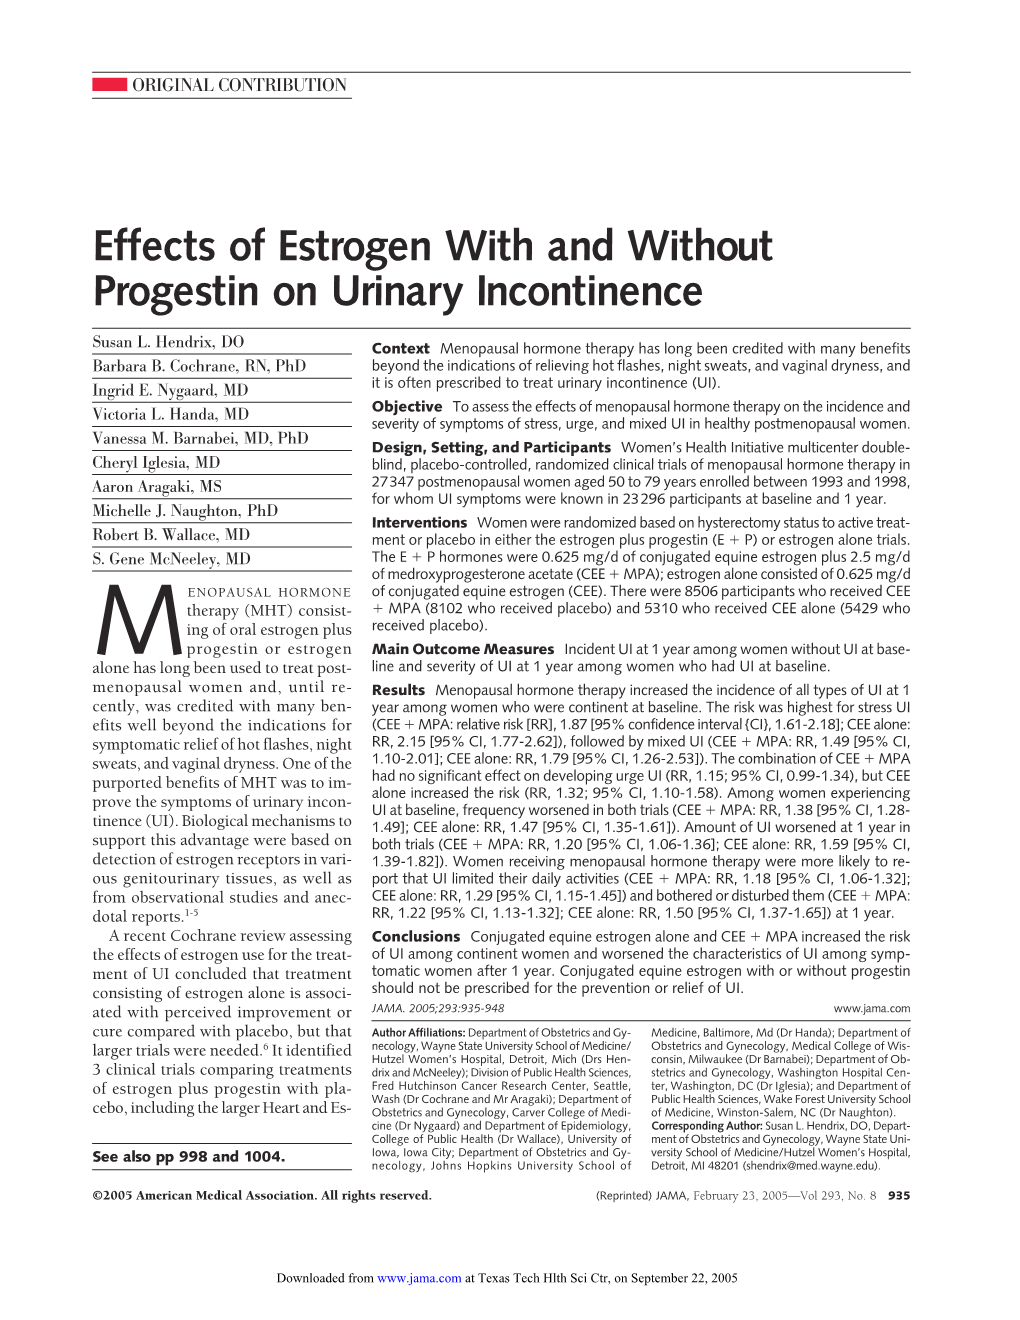 Effects of Estrogen with and Without Progestin on Urinary Incontinence